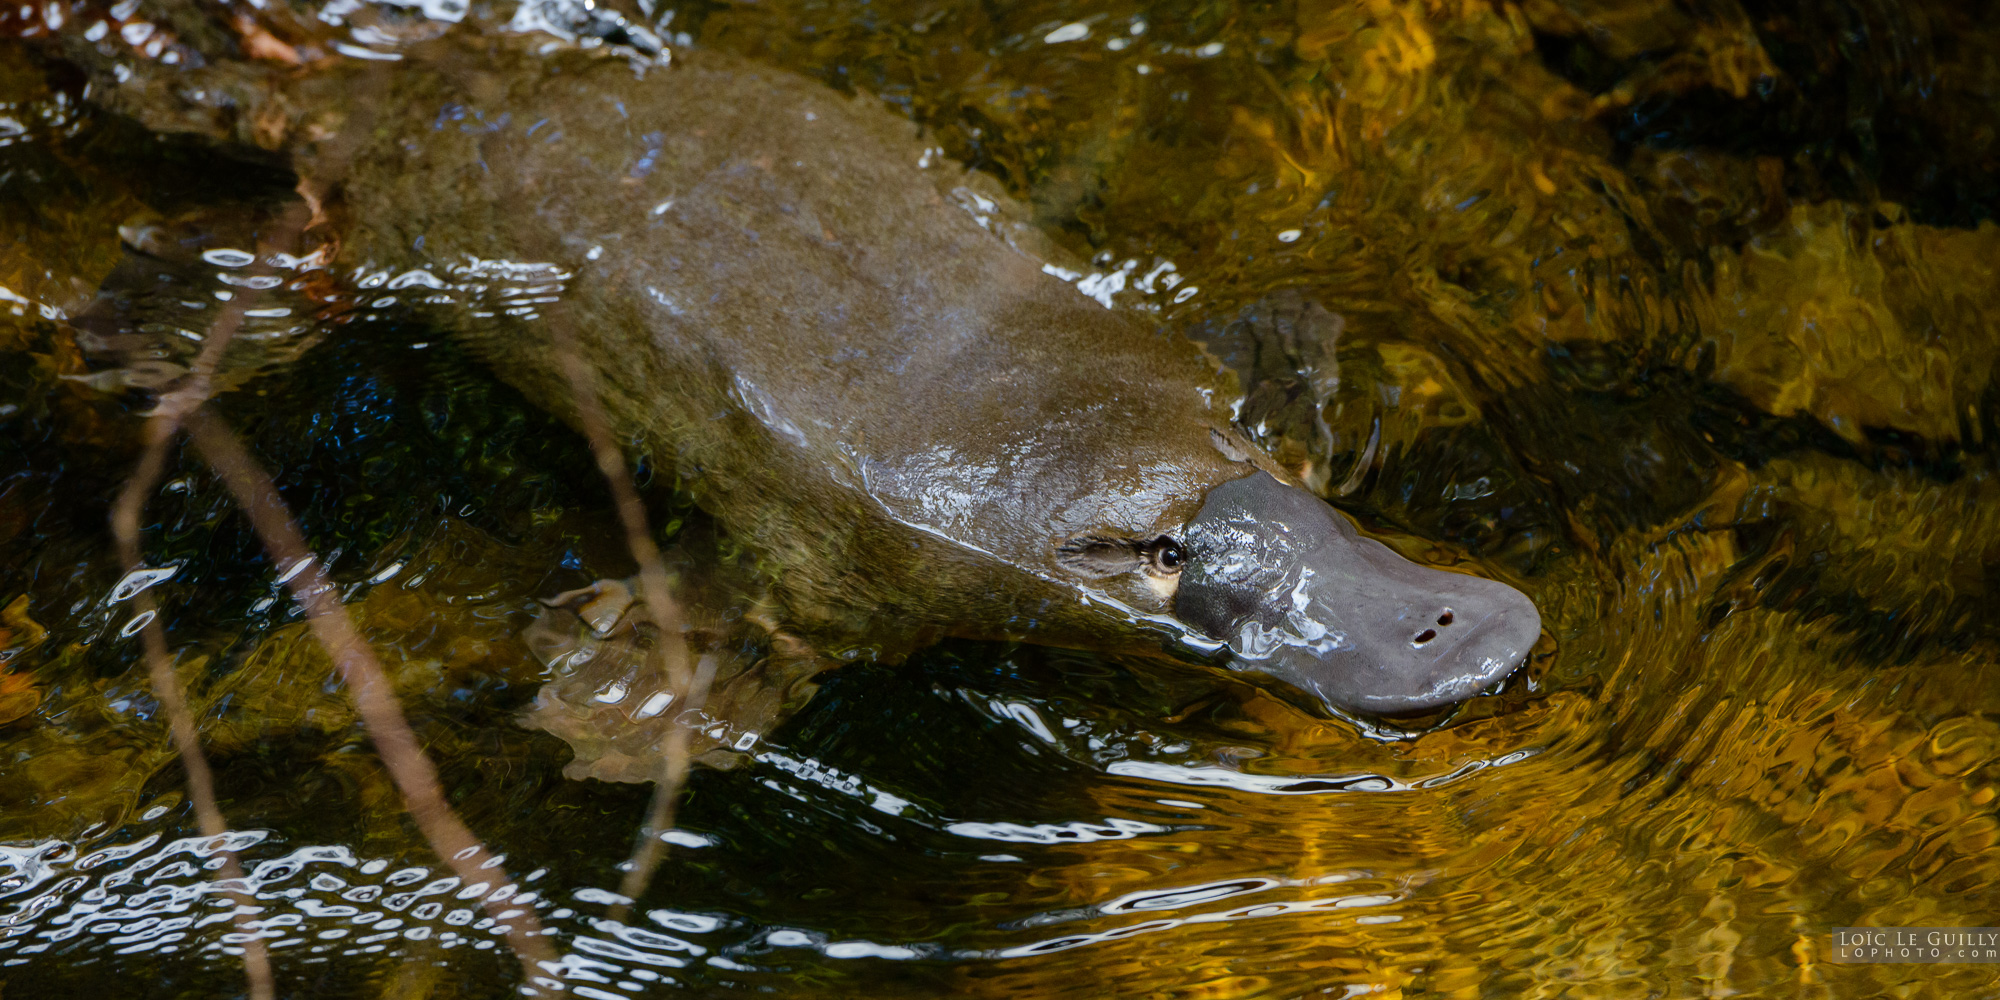 How to photograph a platypus